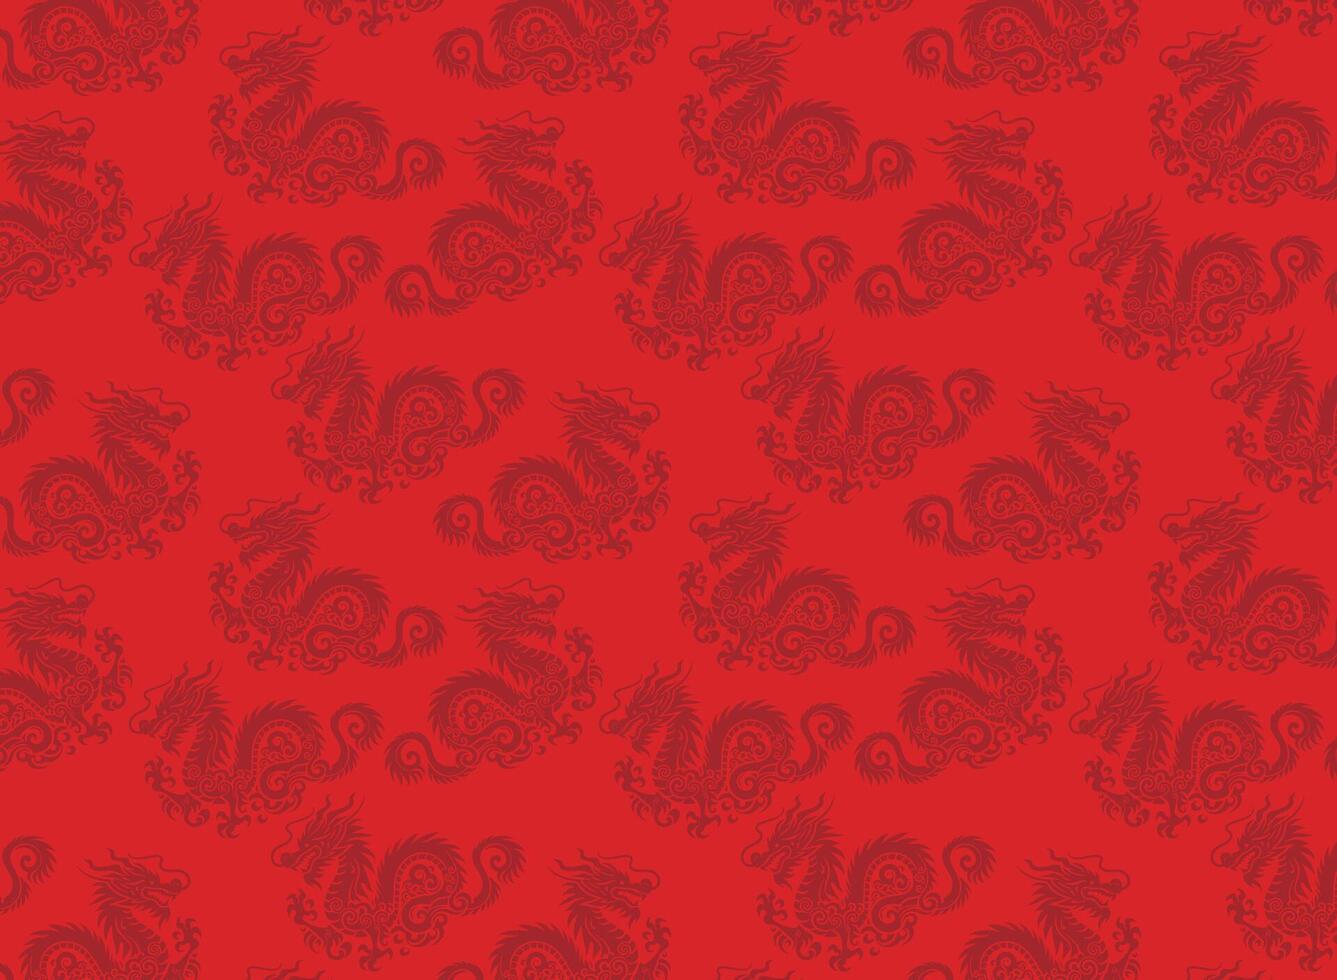 red dragon, vector illustration, for backgrounds and fabrics pattern, repeat, dragon year